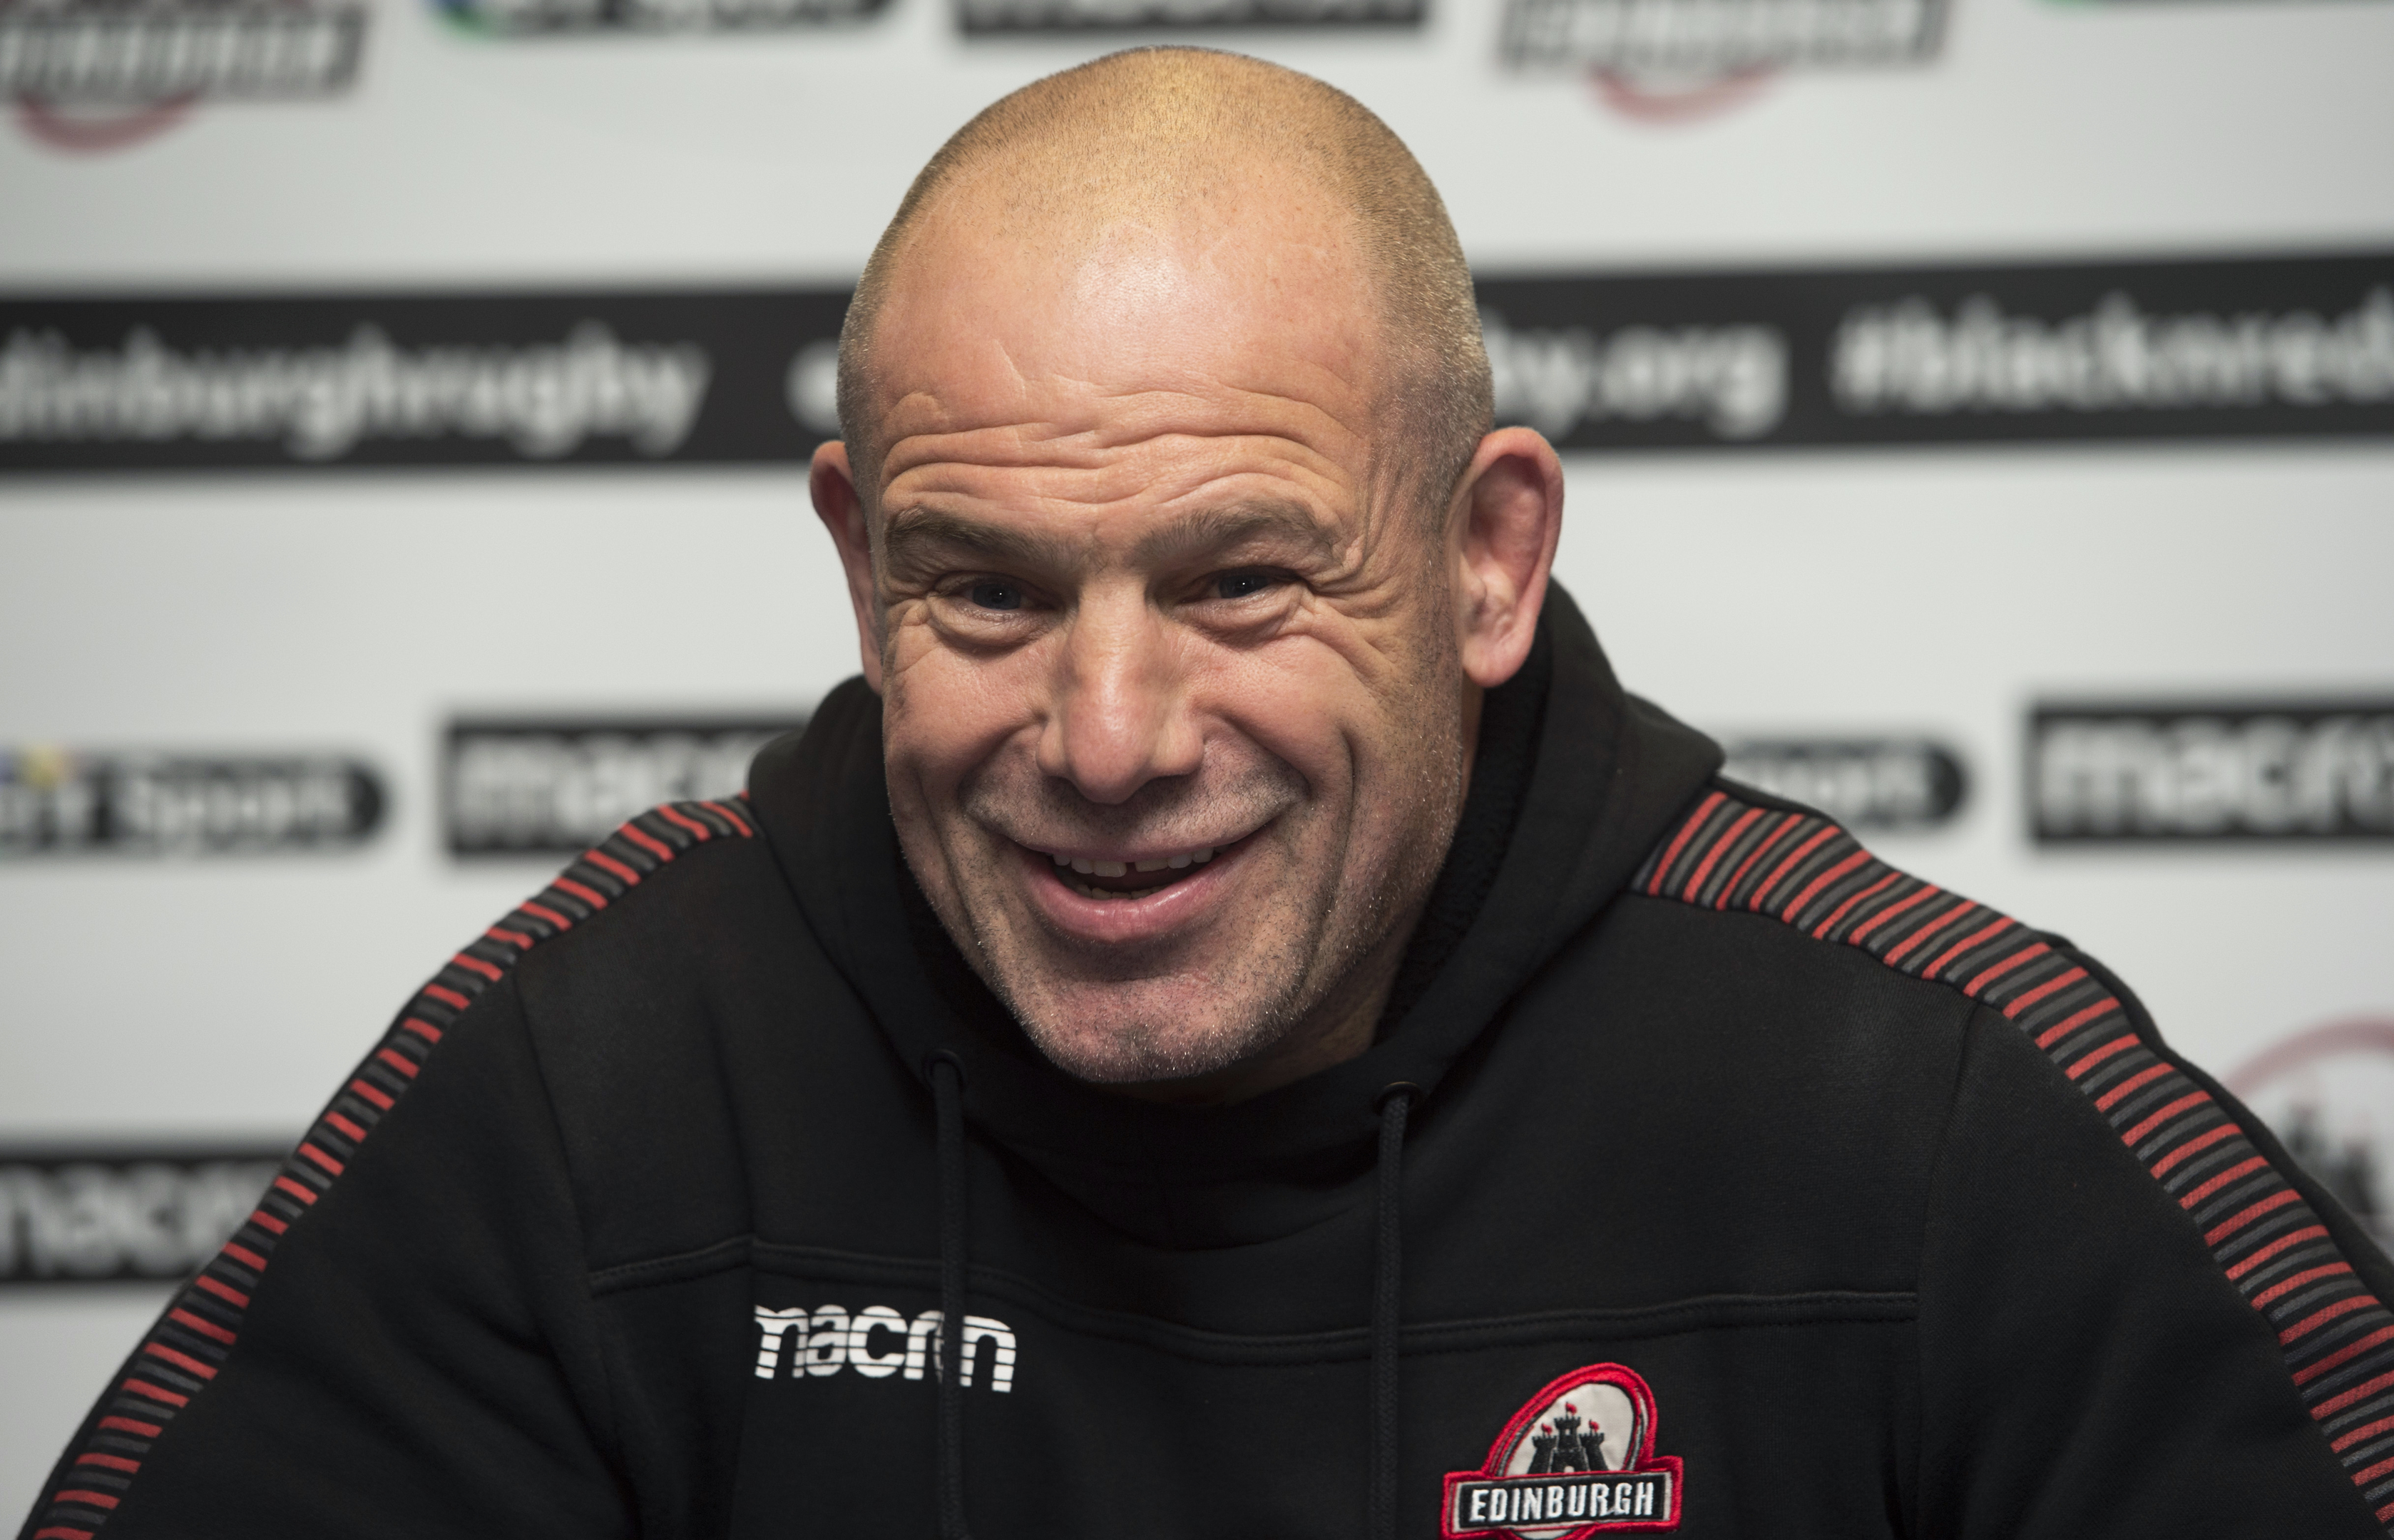 Edinburgh Rugby head coach Richard Cockerill promises an attacking game in the 1872 Cup first leg.